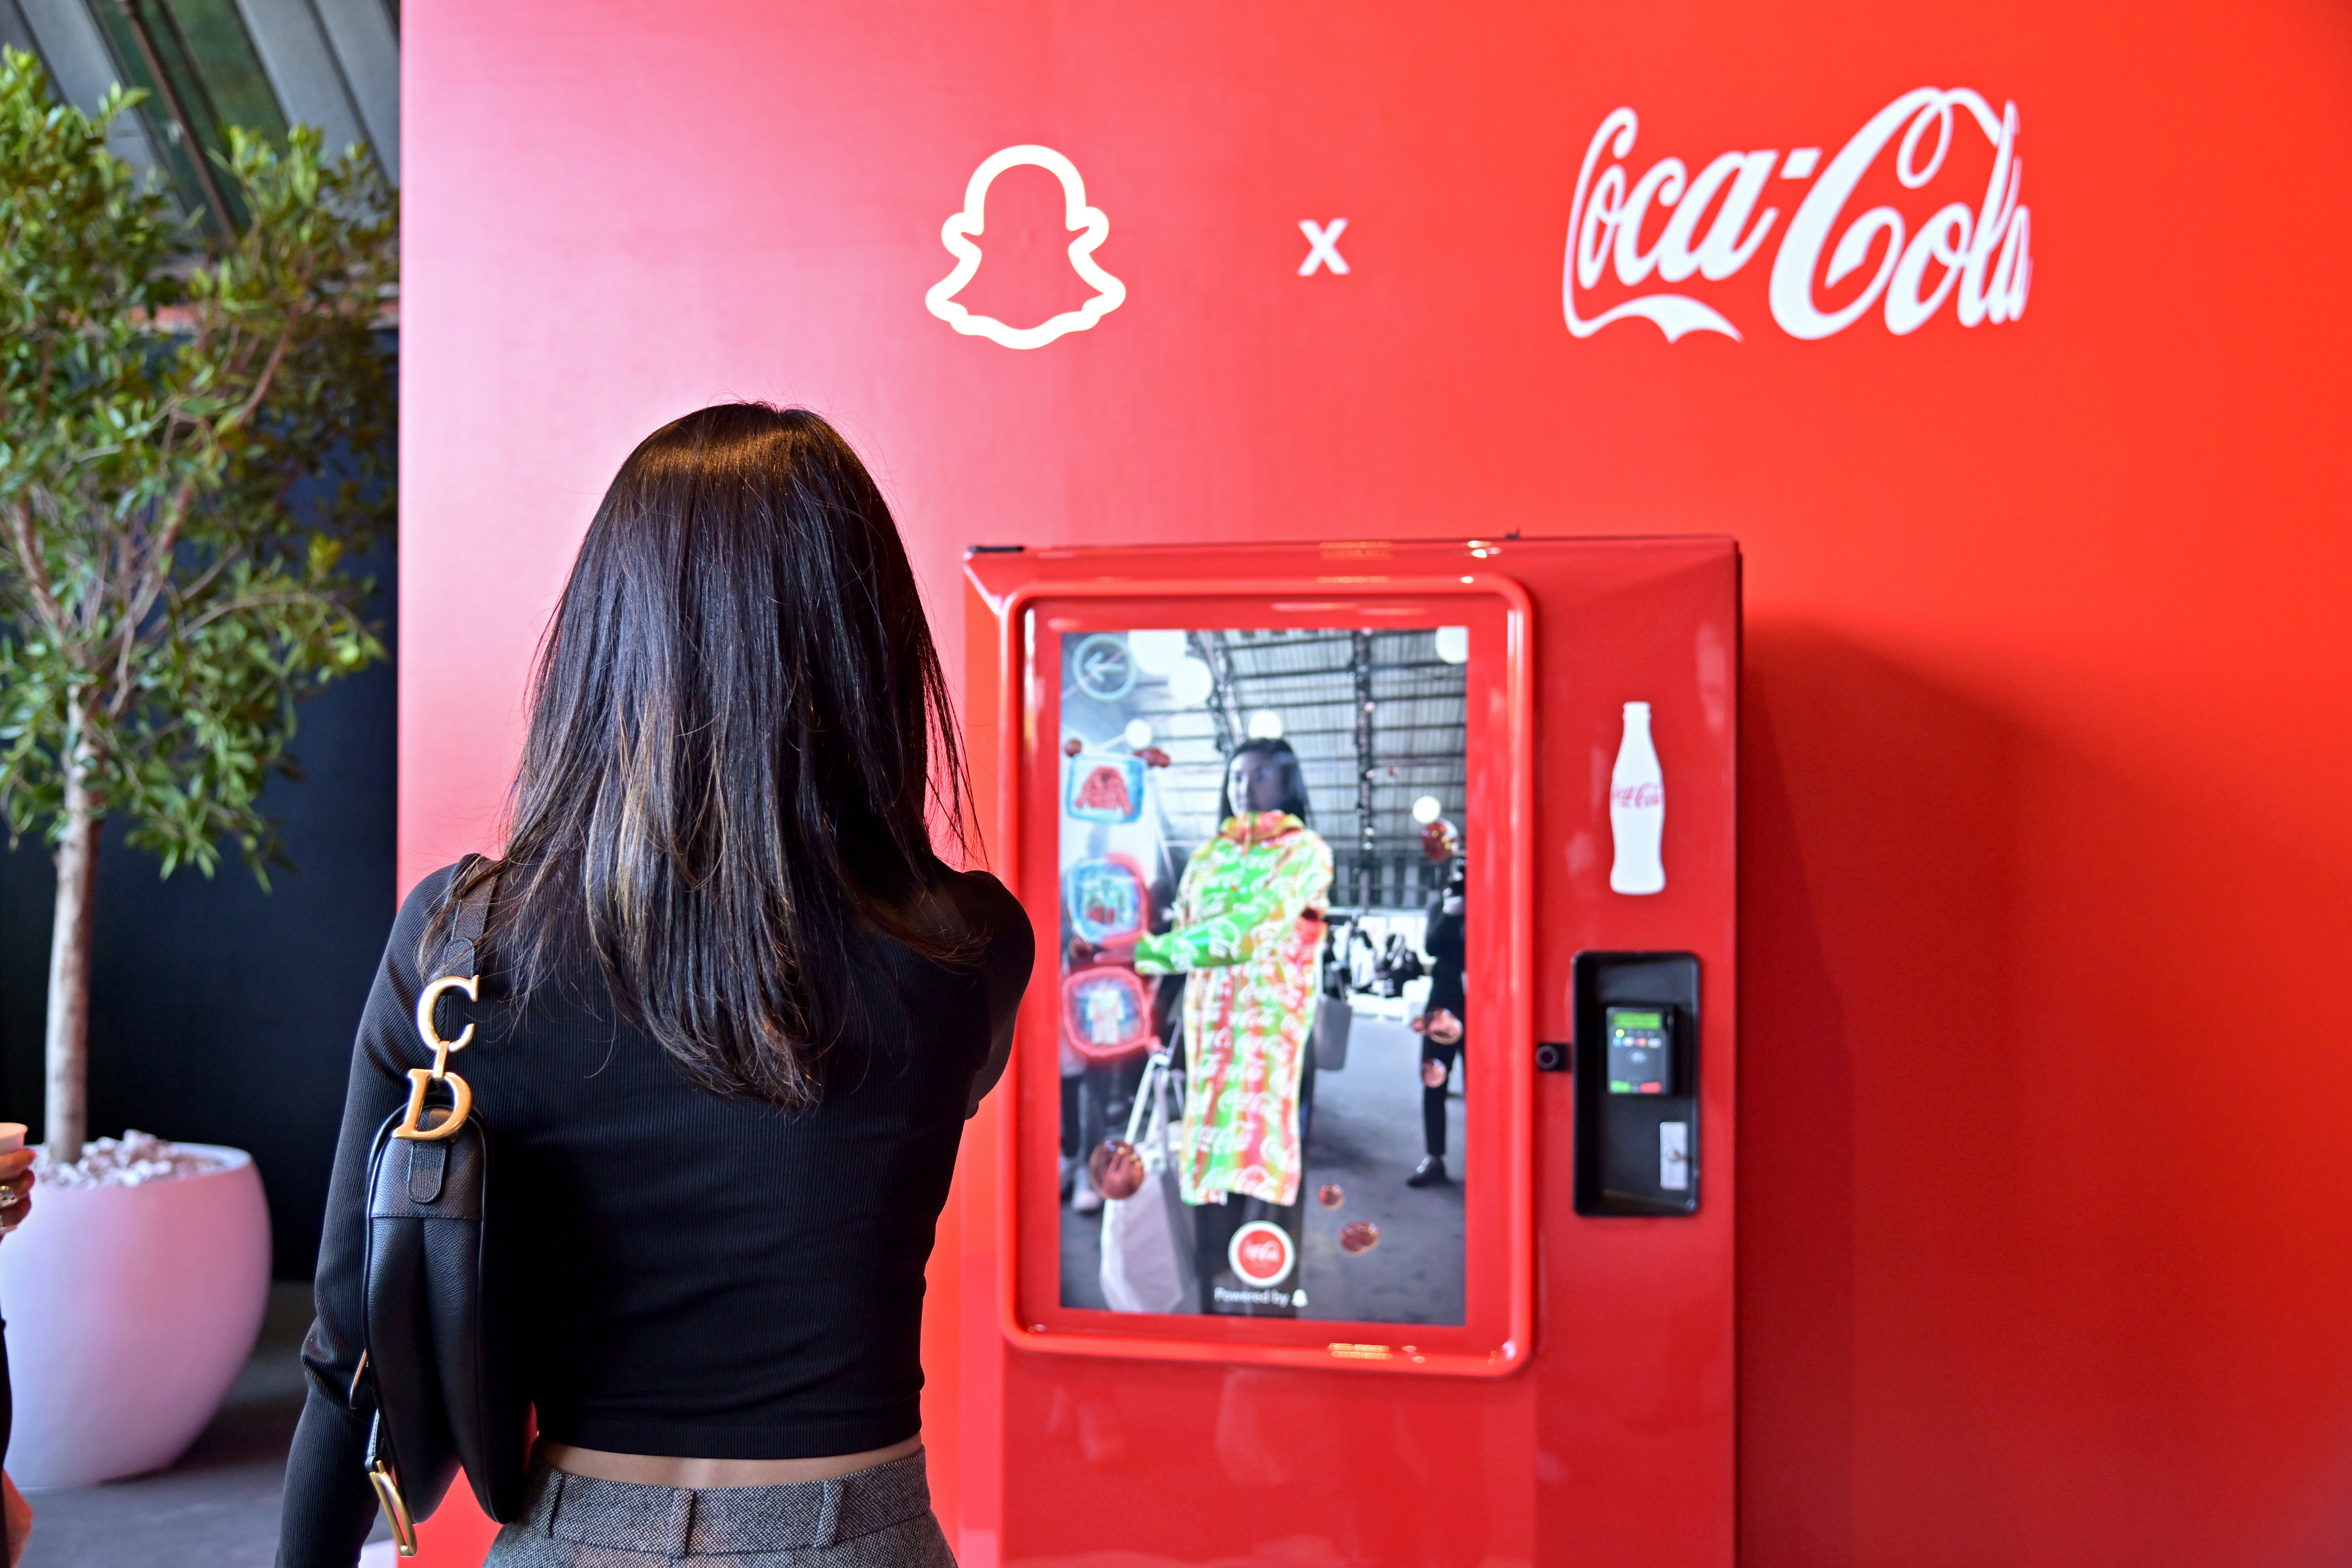 Photo of attendee using the AR-powered Coca-Cola vending machine